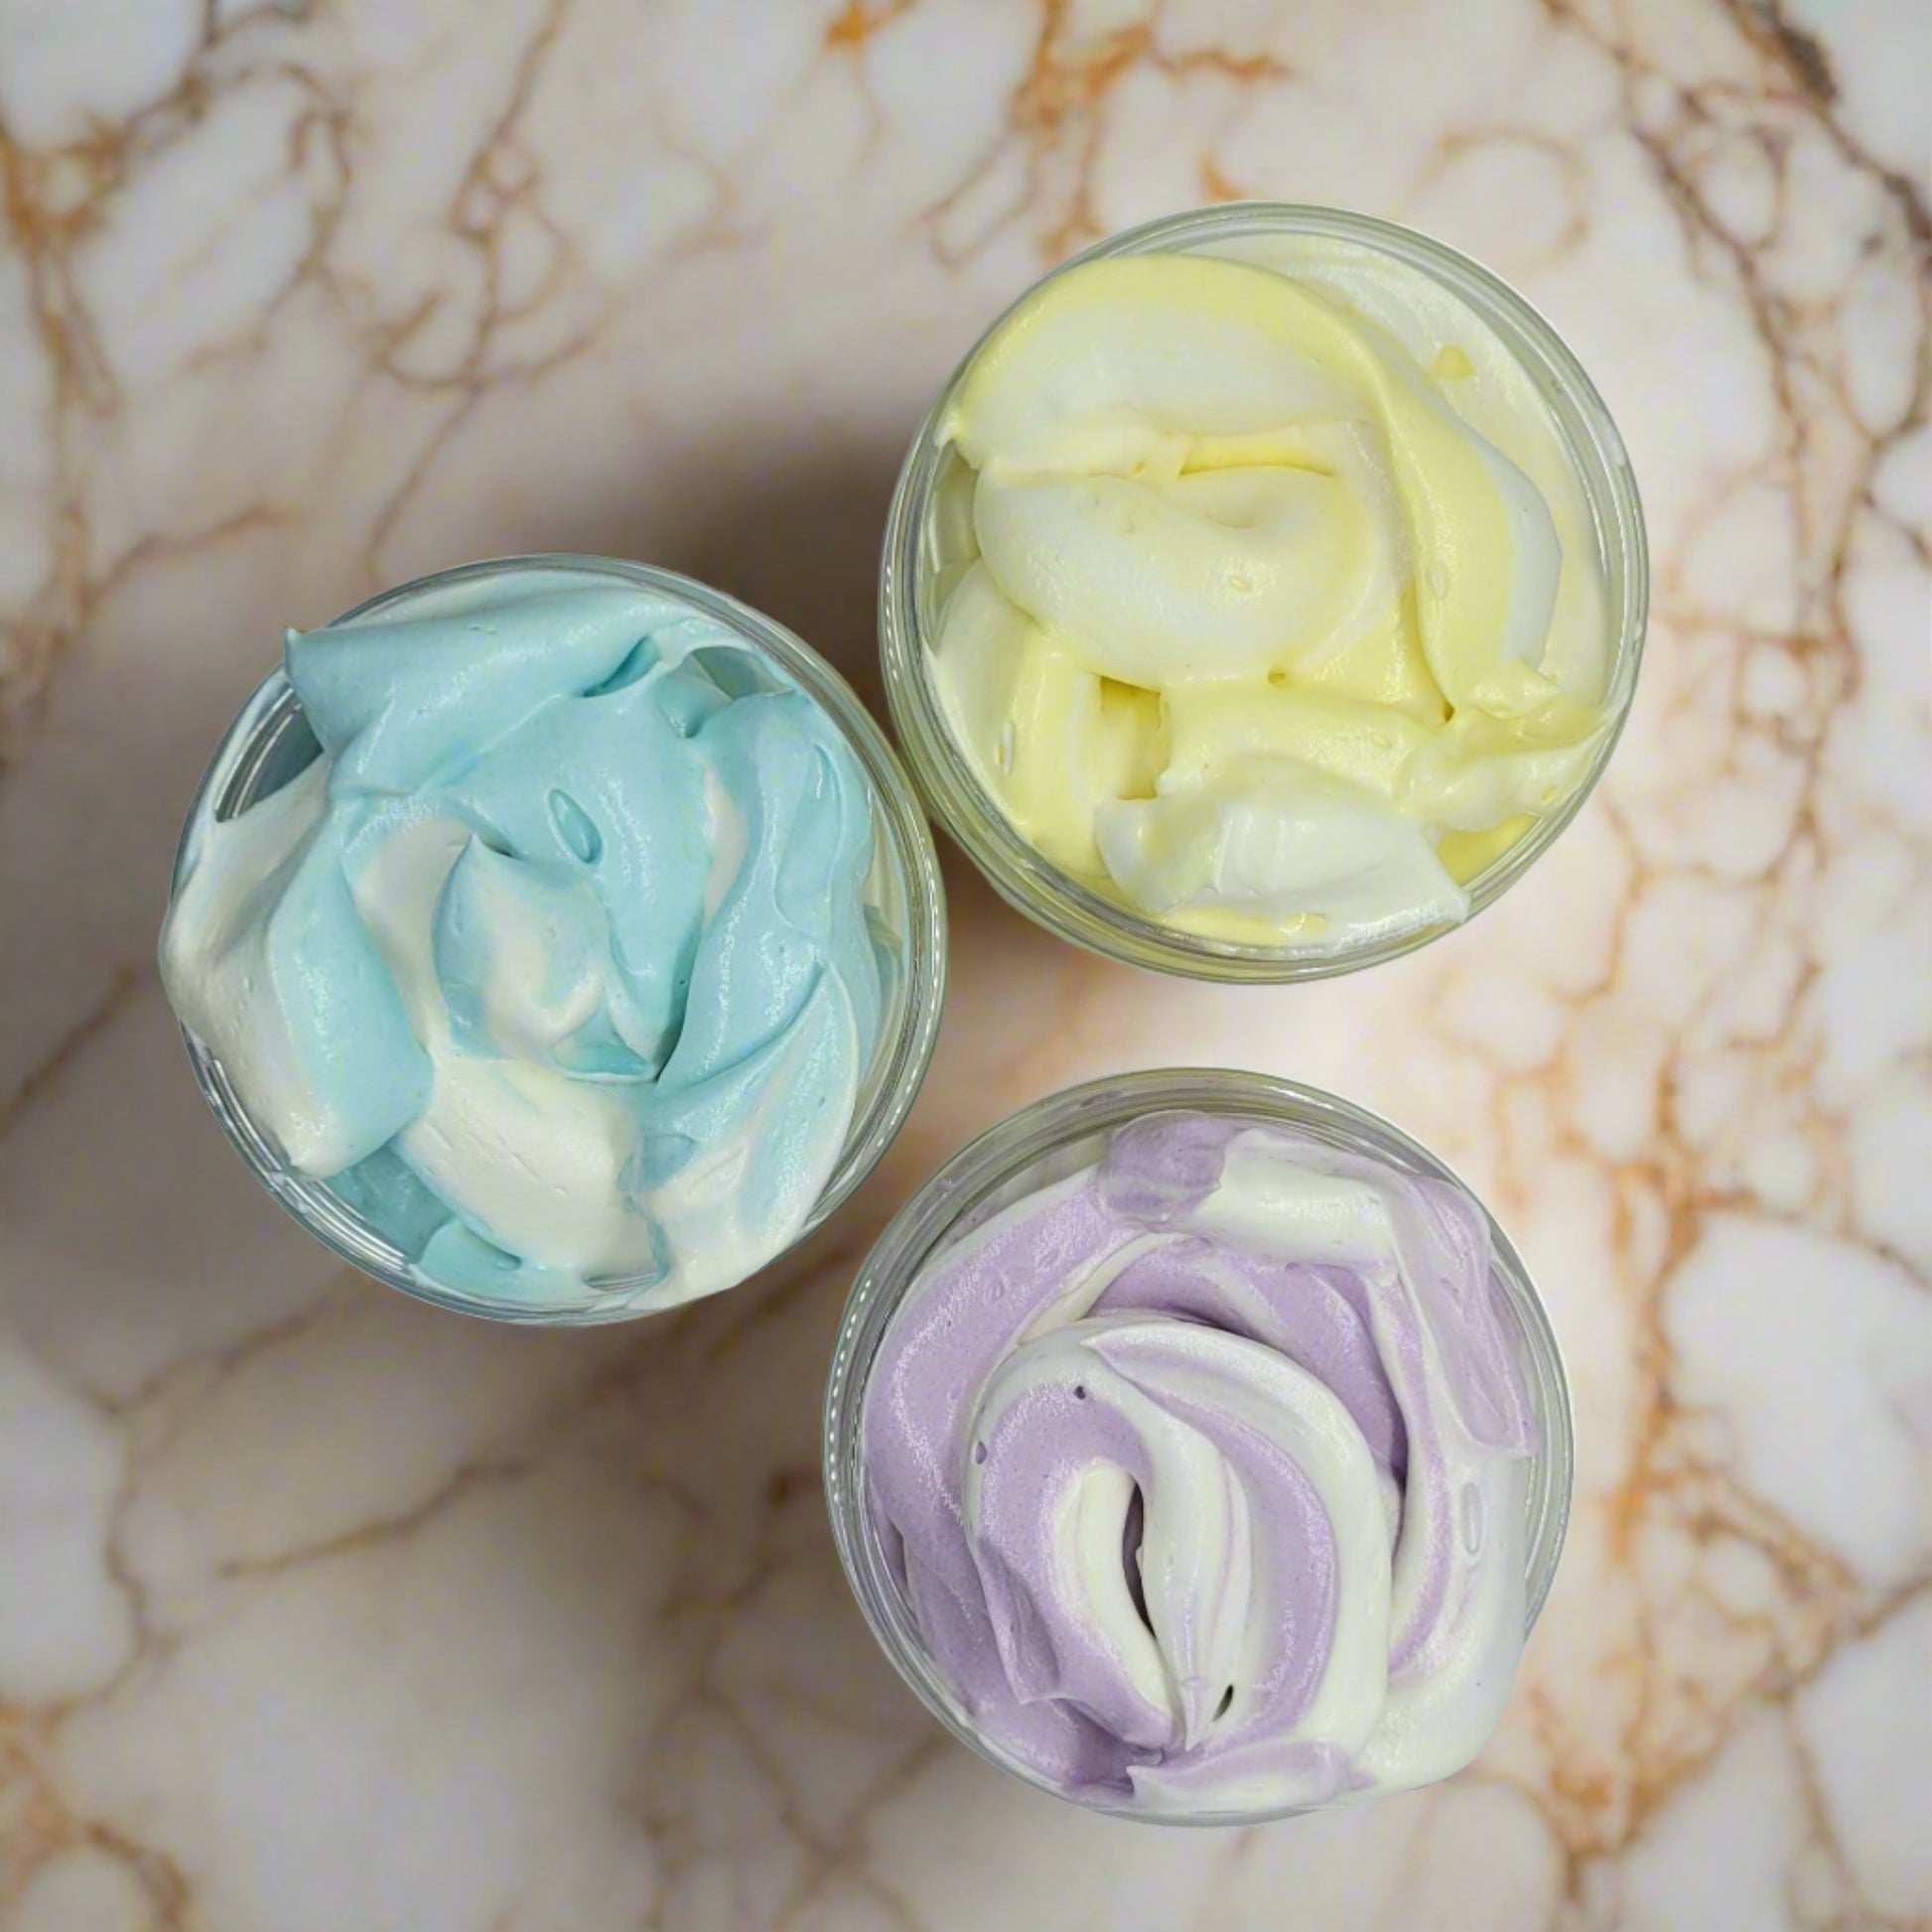 Kids Whipped Body Butter - Gifted One Princes